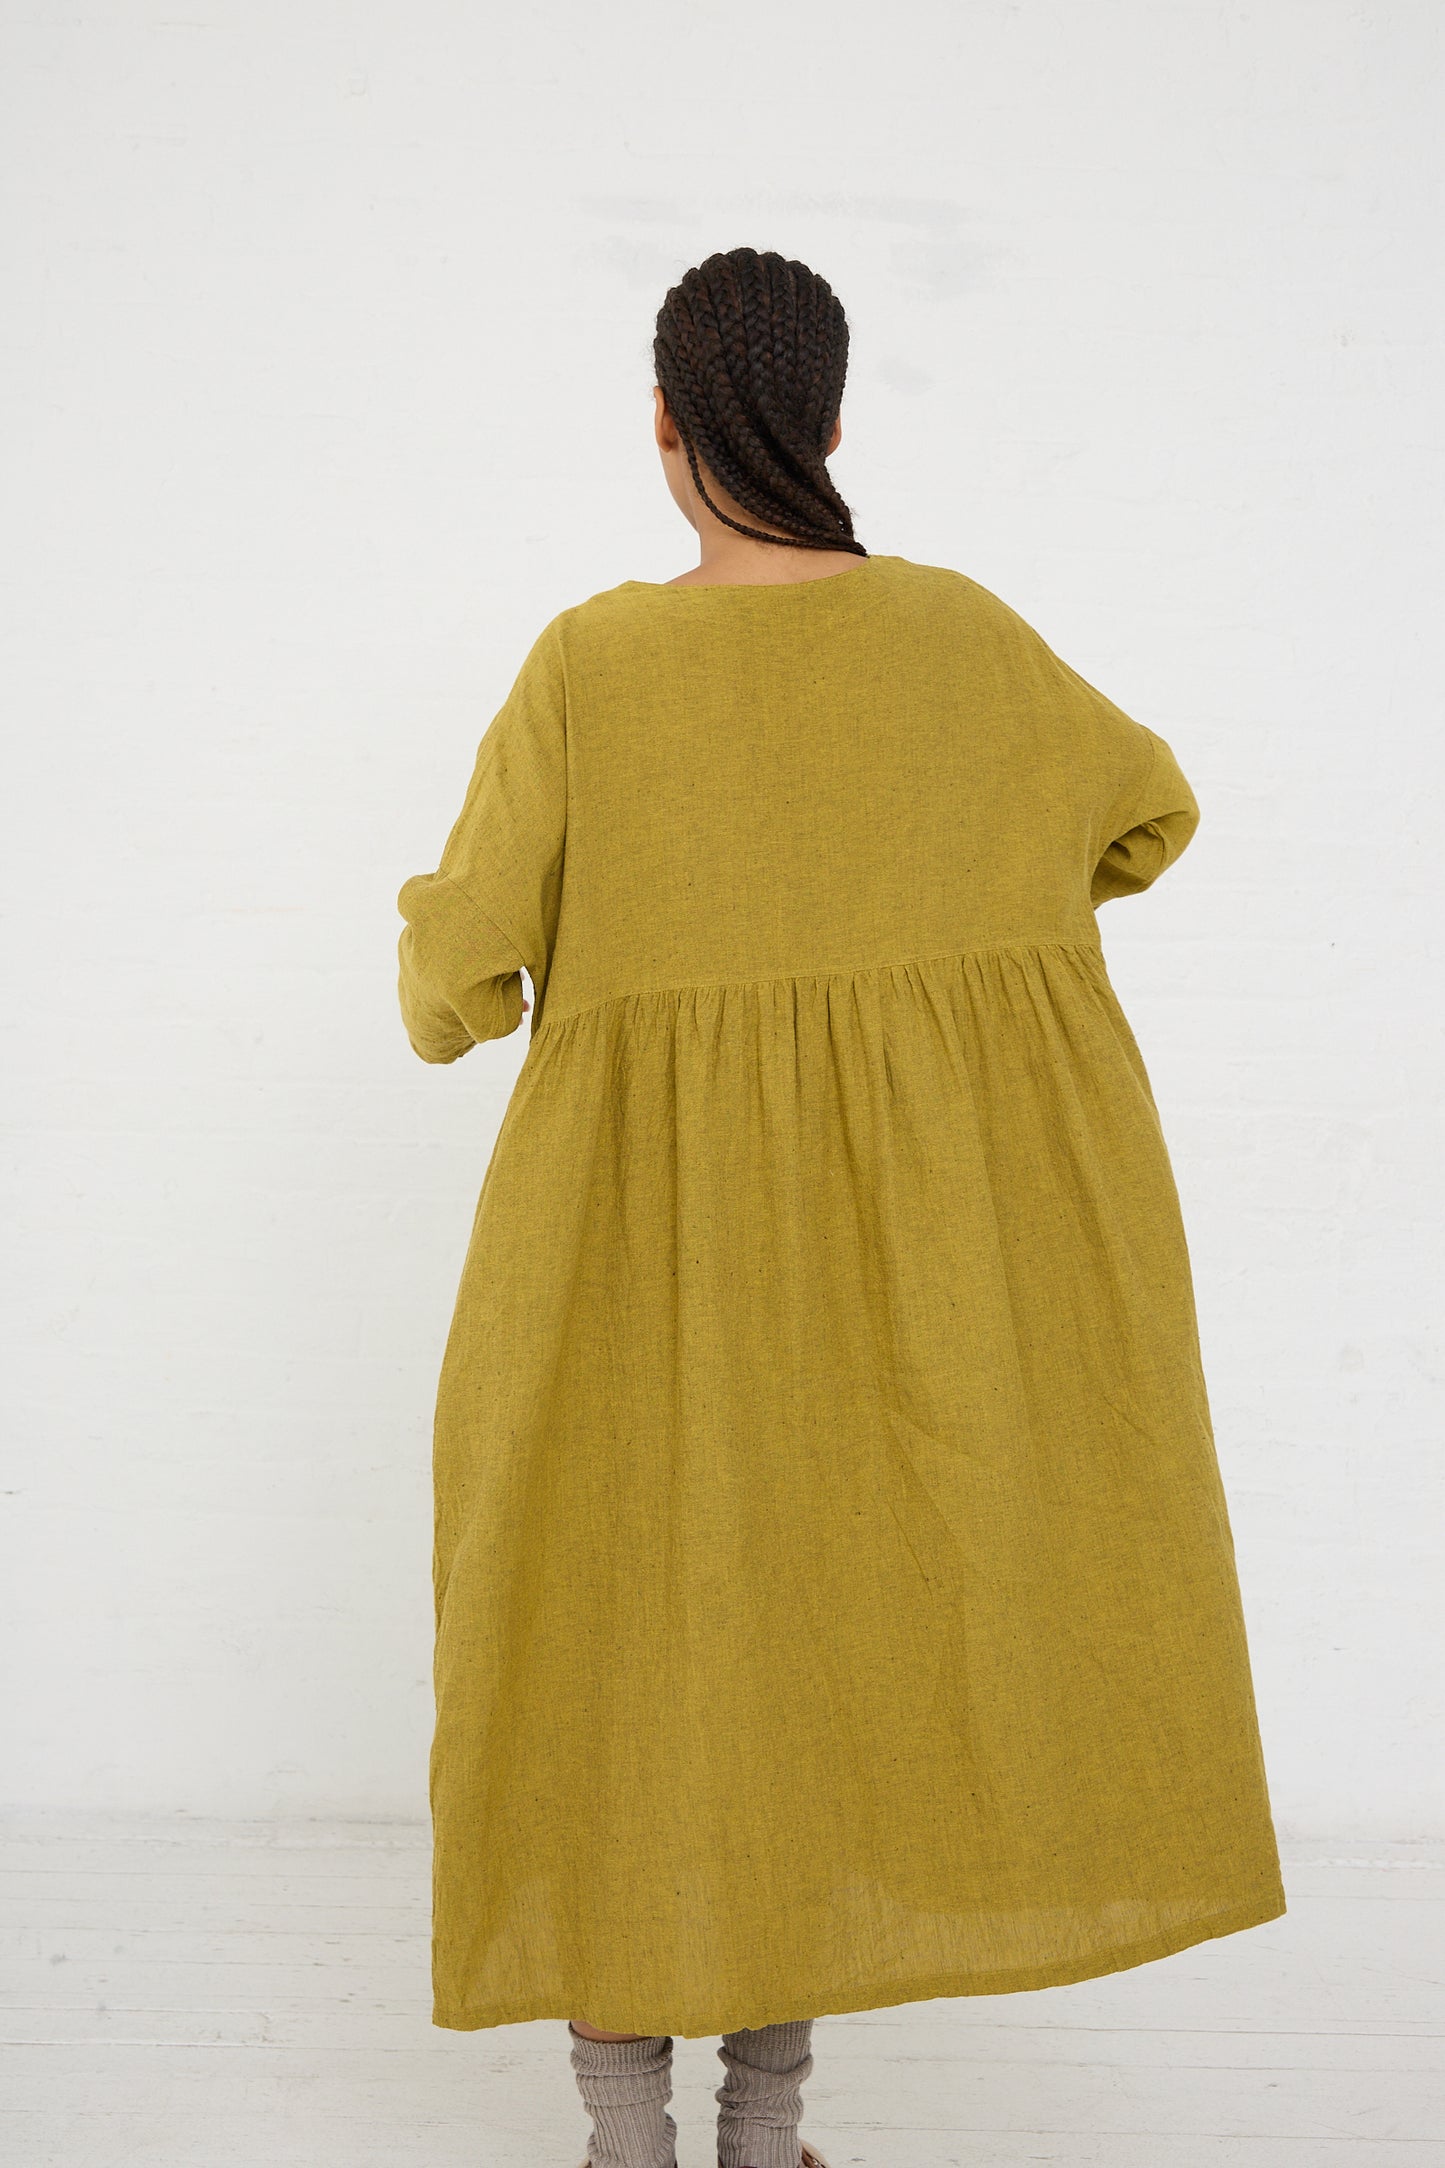 Woman standing with her back to the camera, wearing a Ichi Antiquités Linen Cotton Herringbone Dress in Yellow with gathered waist detail.